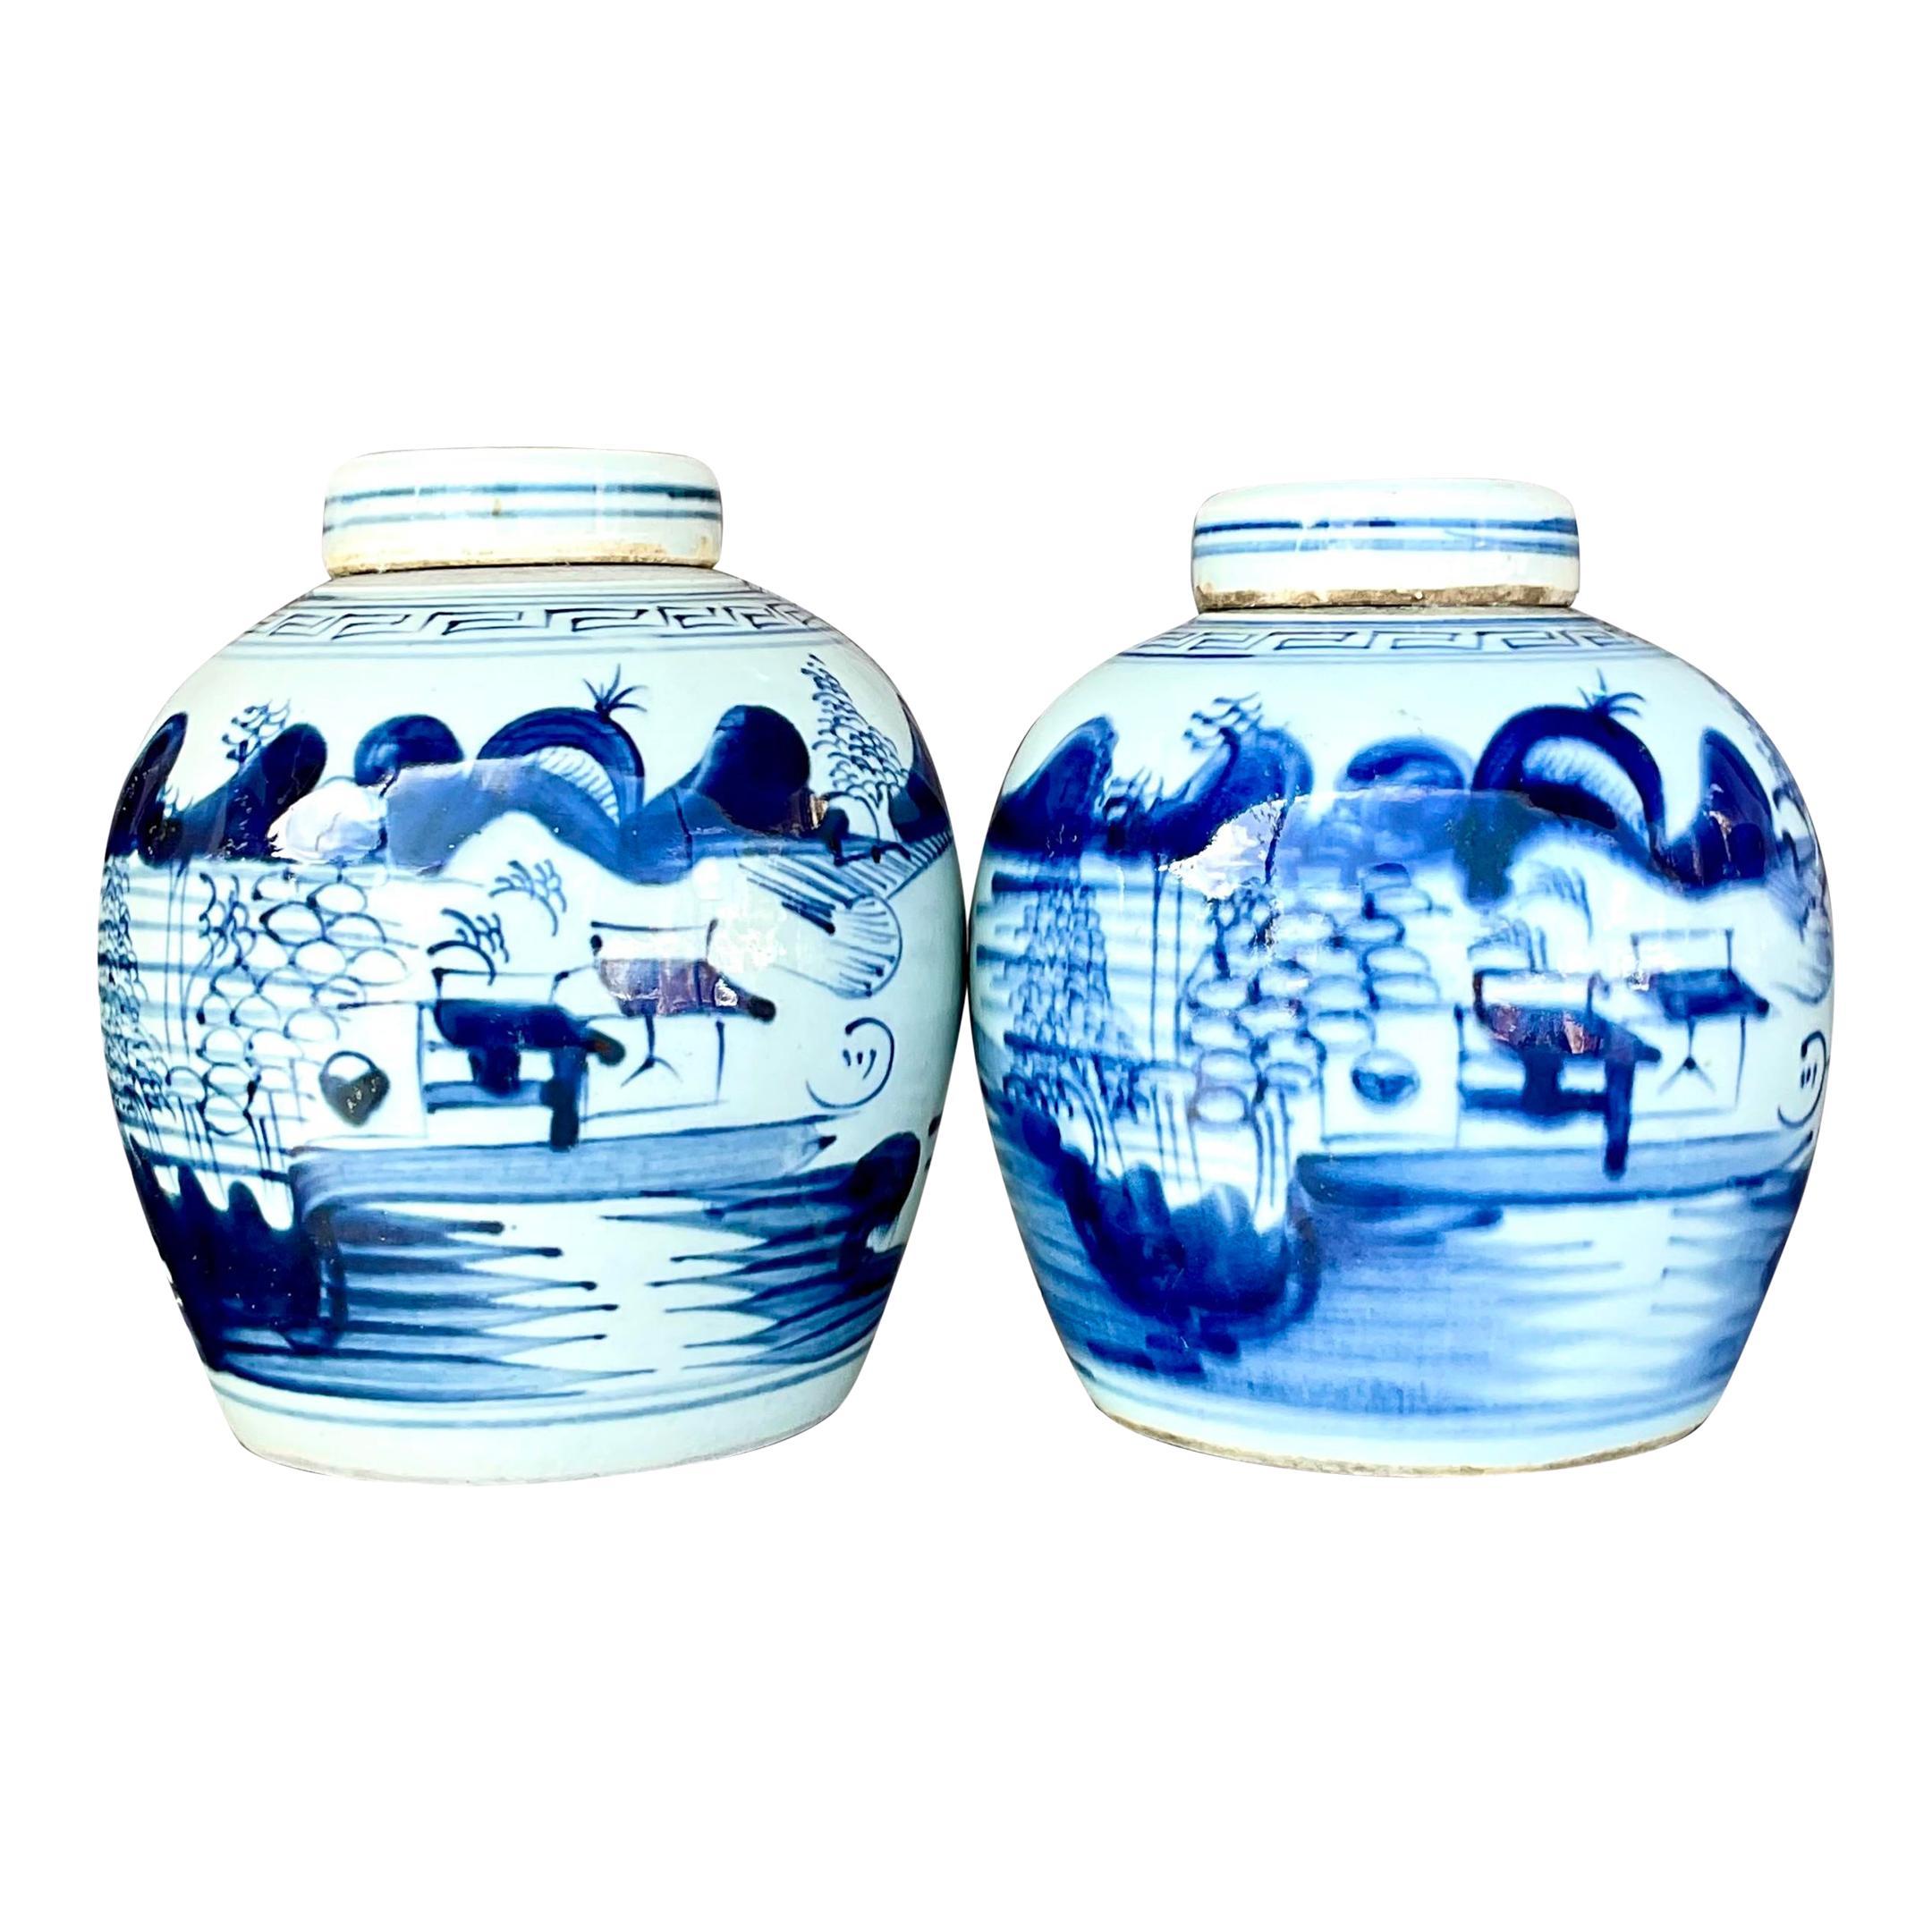 Vintage Asian Petite Blue and White Lidded Jars - Set of 2 For Sale